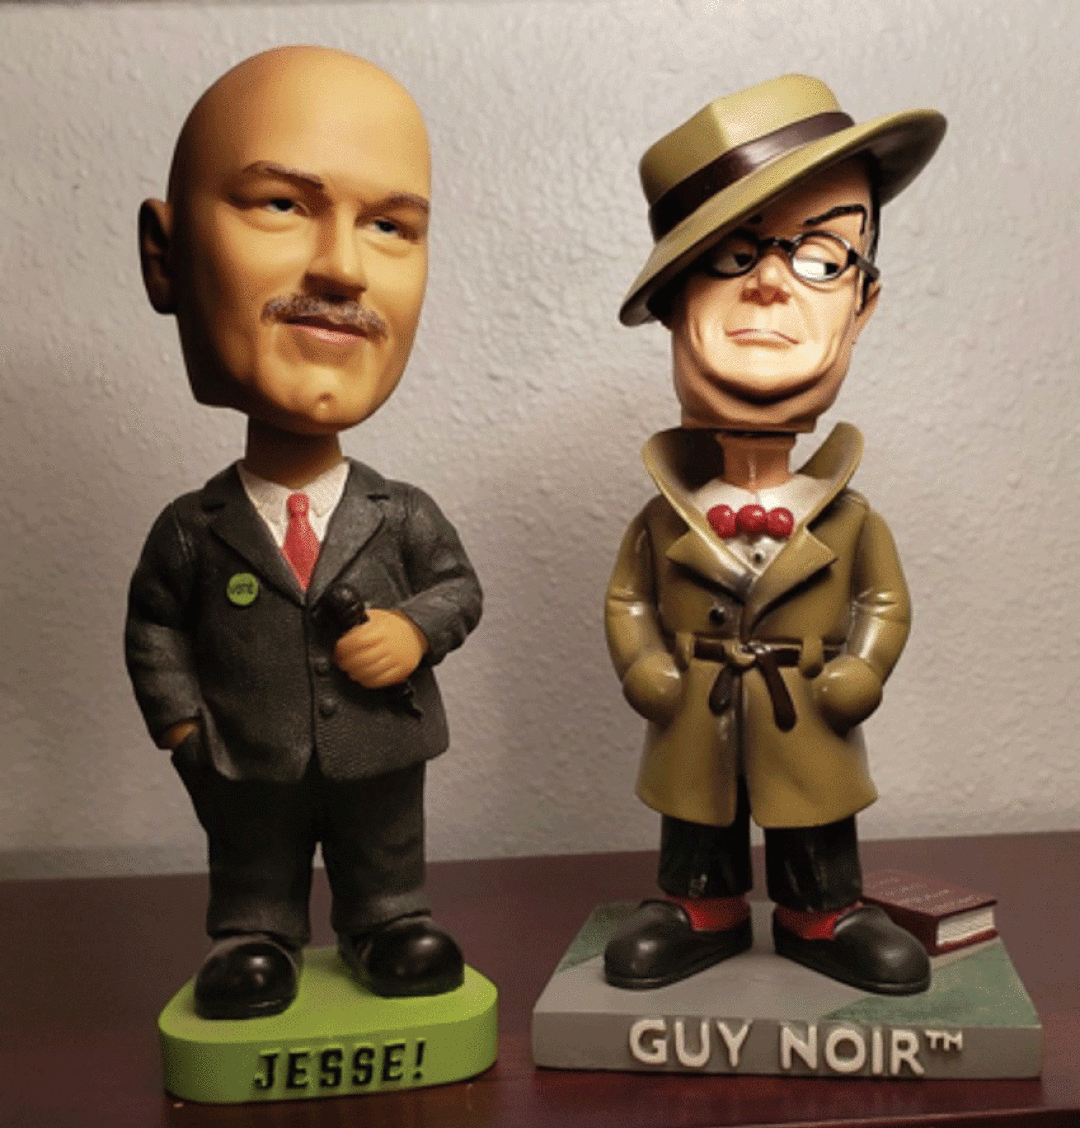 A Minnesota tag team. Radio Host, Garrison Keillor, and his peerless punching bag Minnesota Governor, Jesse Ventura. From Harry Welty’s kitsch collection.